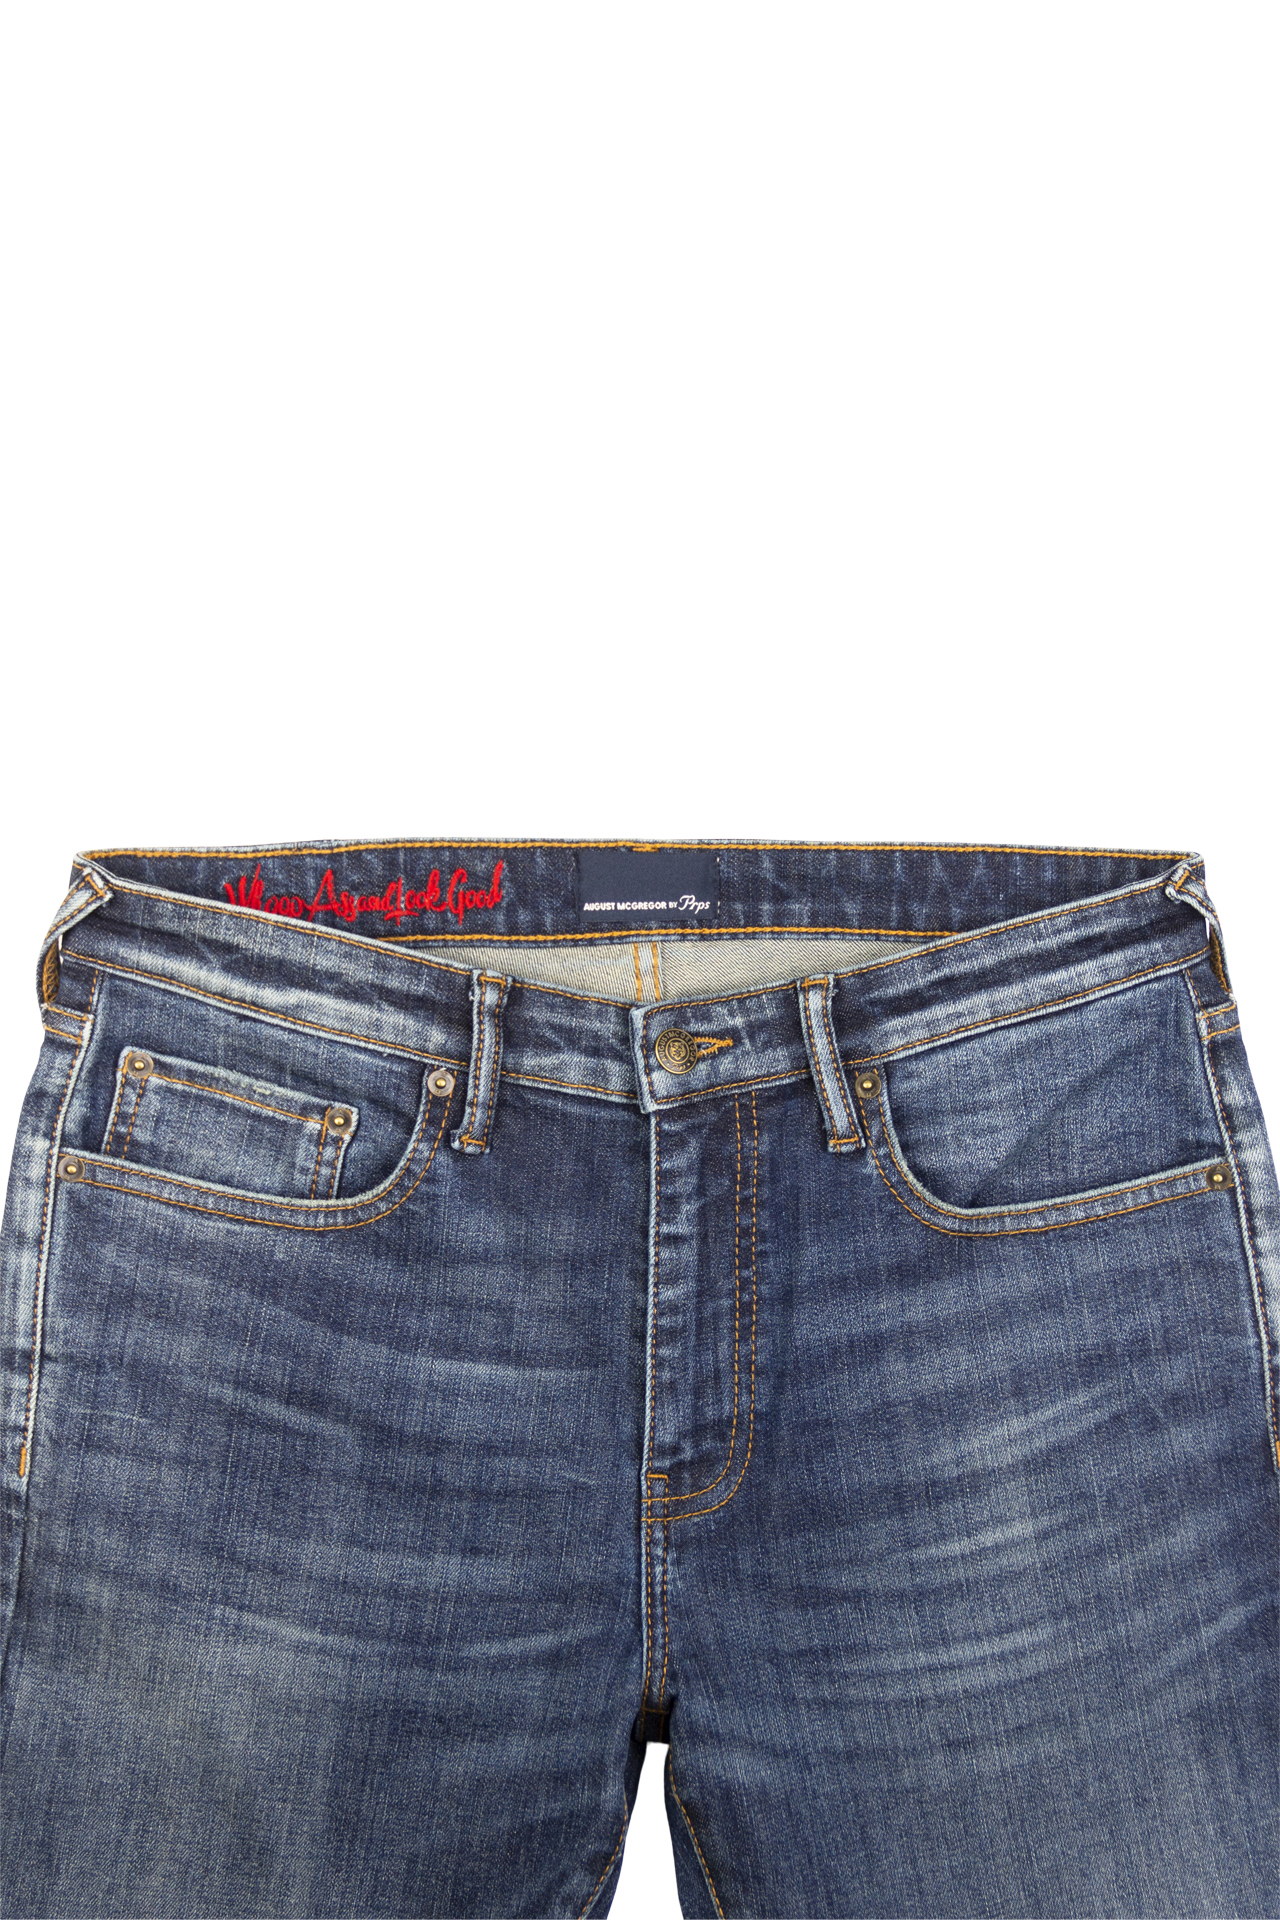 Where to buy PRPS Jeans Online